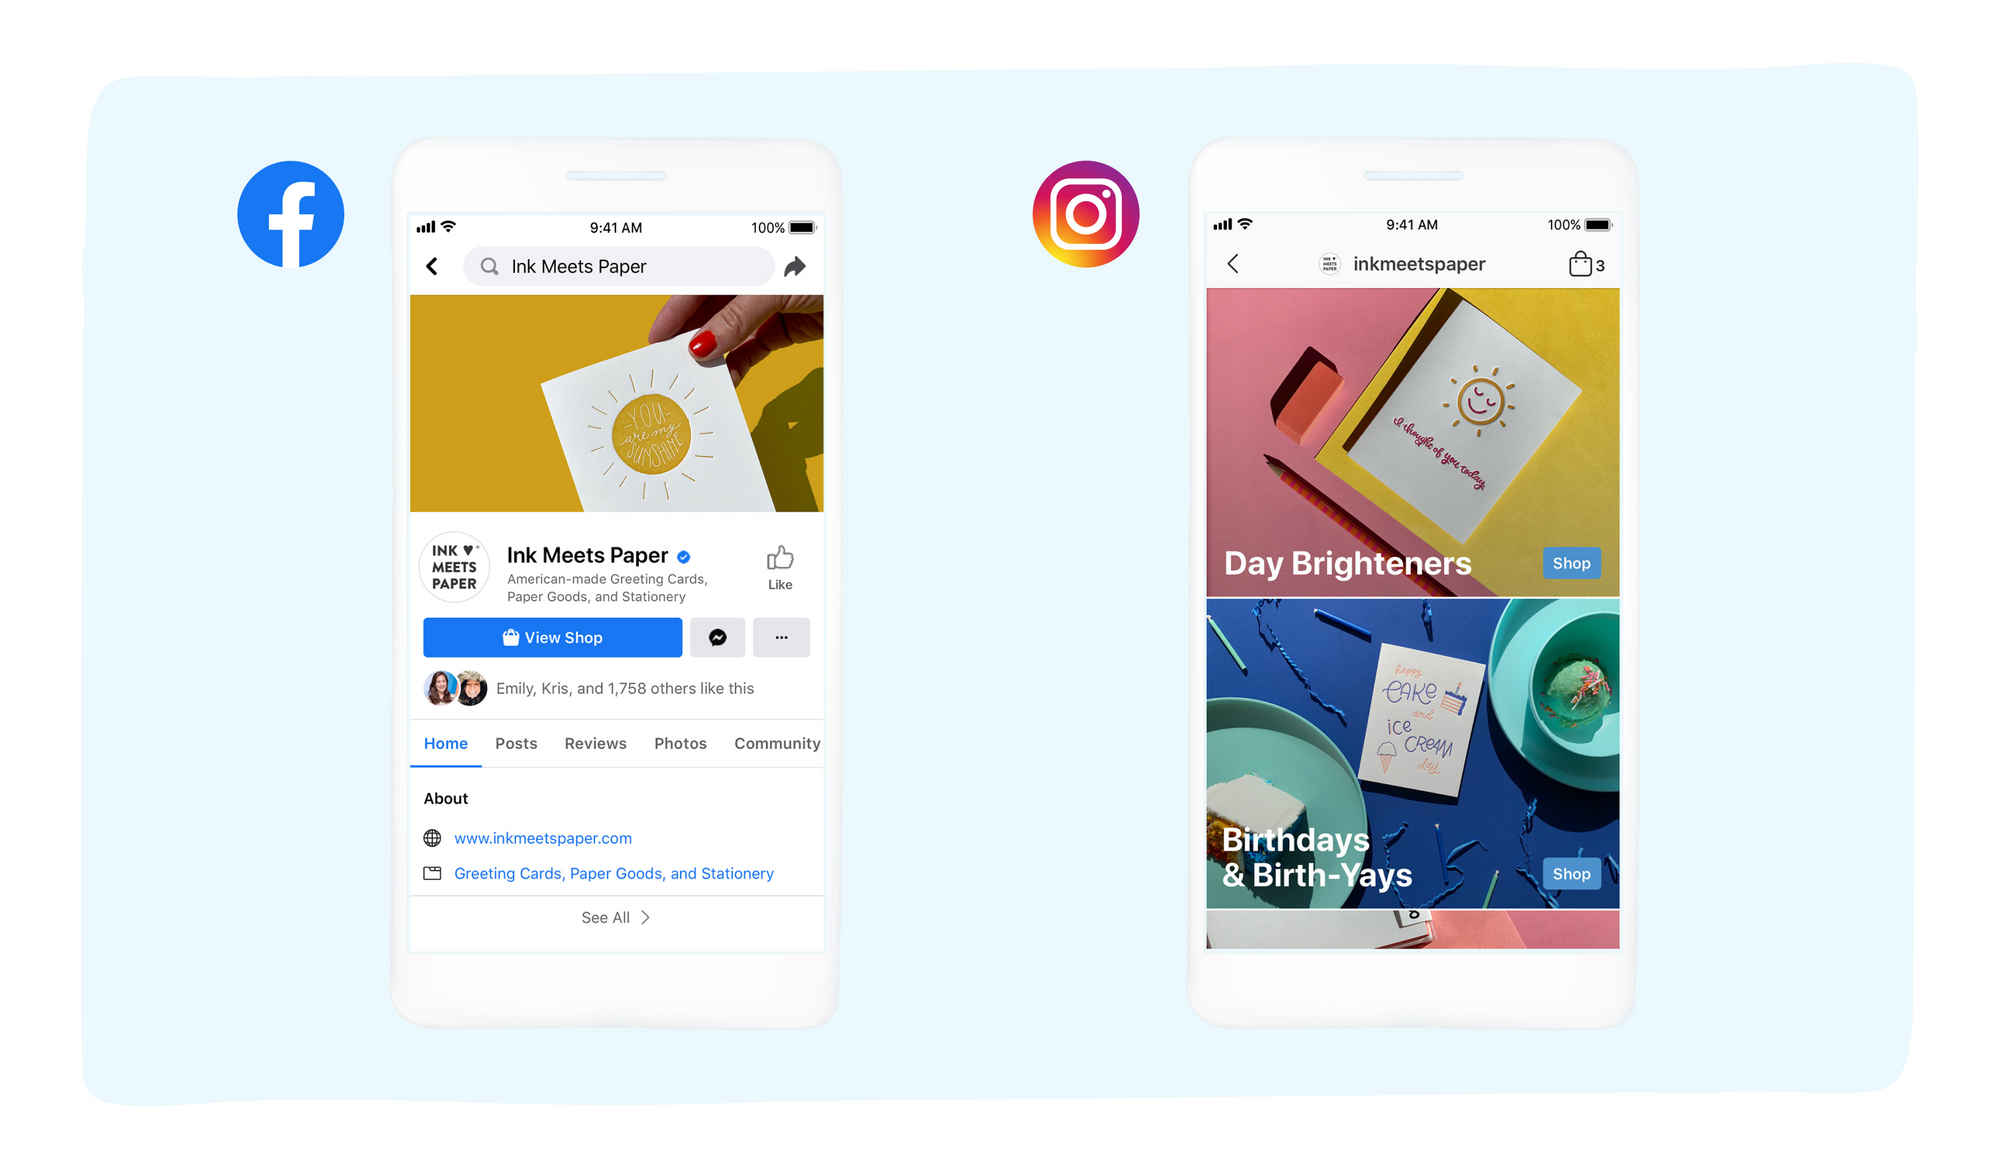 Facebook-Shop-and-Instagram-Shop-on-mobile-devices